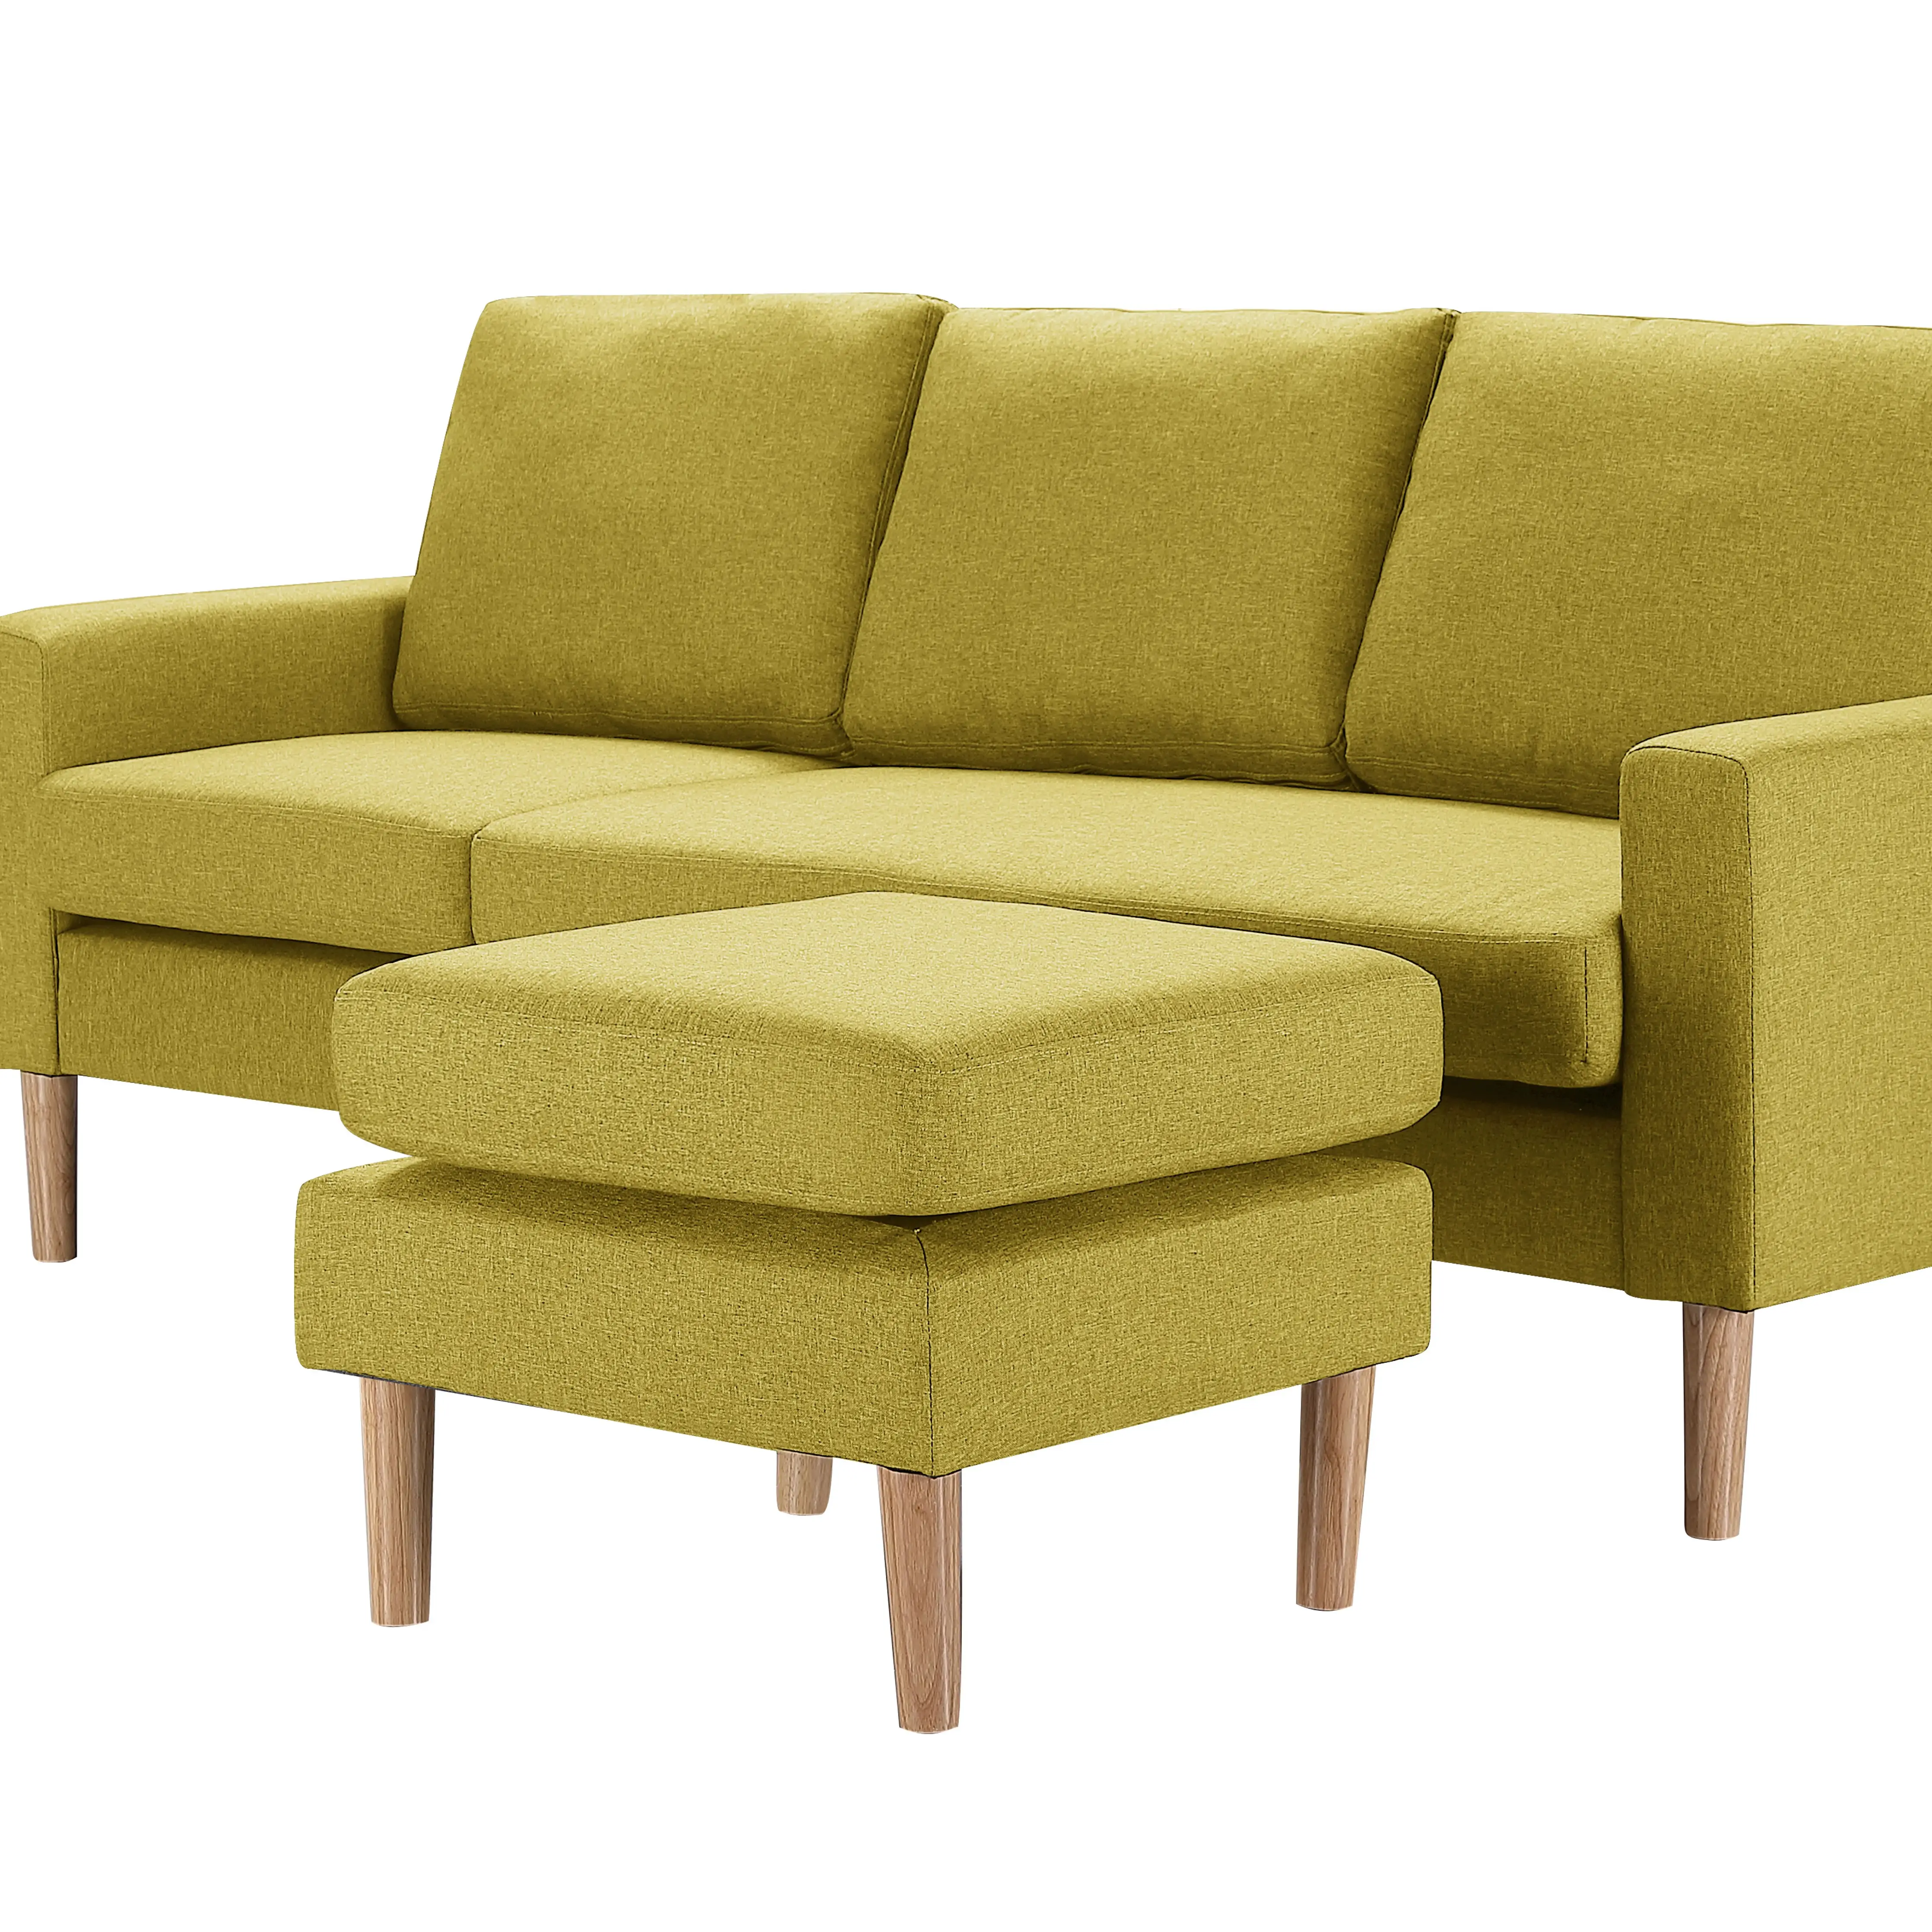 ENTSPANNEN LOUNGE SCHNITTS <span class=keywords><strong>SOFA</strong></span> LINKS VOR GELB <span class=keywords><strong>STOFF</strong></span>